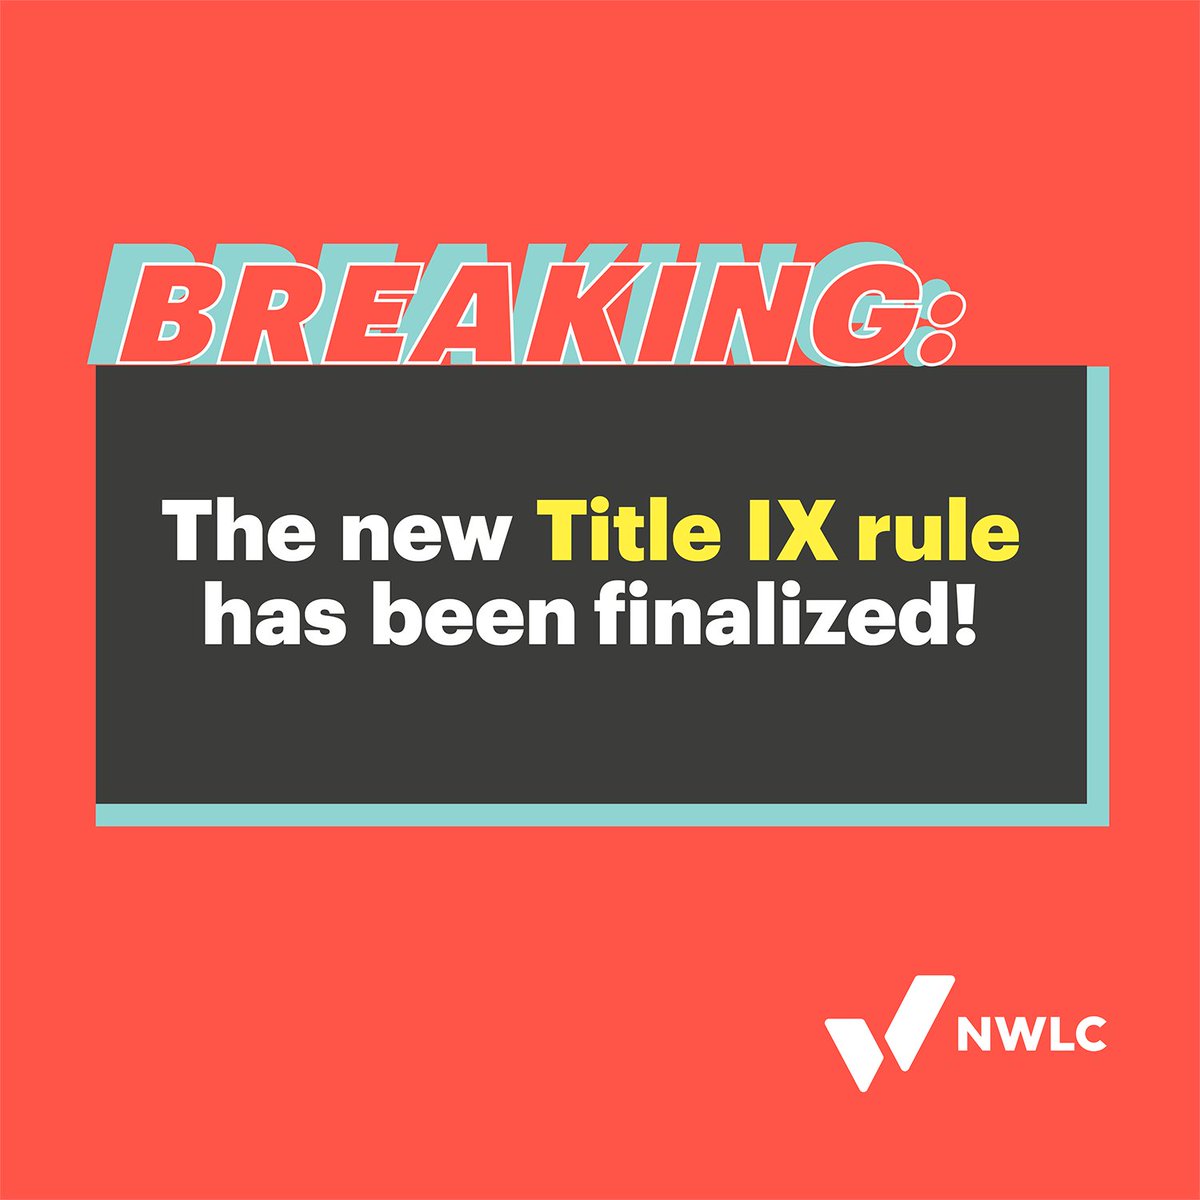 FINALLY! Today, after years of pressure from students and advocates, the Biden administration finalized updates to the Title IX rule.